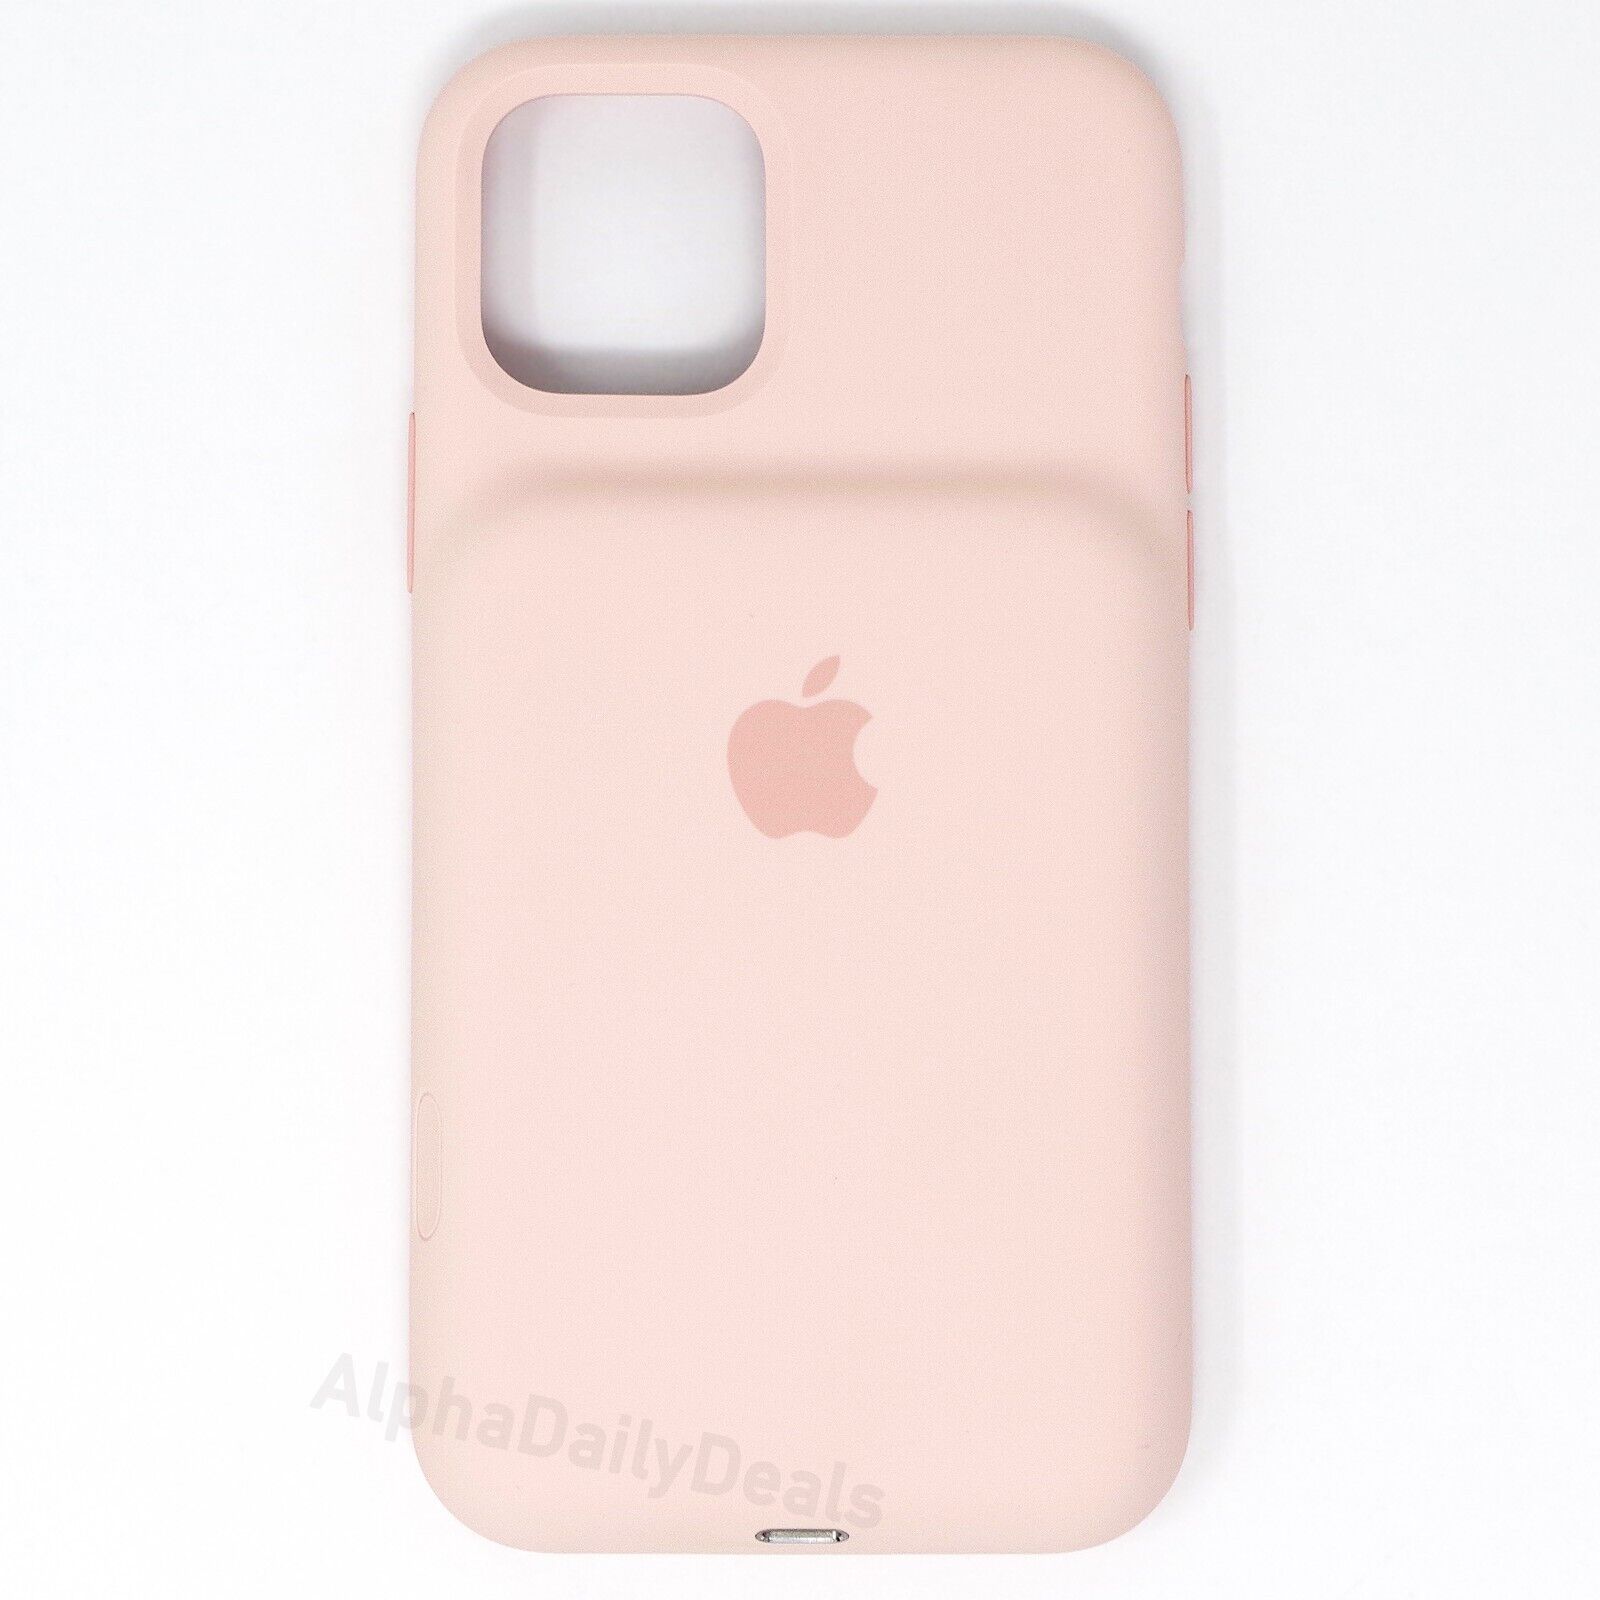 Apple Smart Battery Case for iPhone 11 Pro - Black White Pink